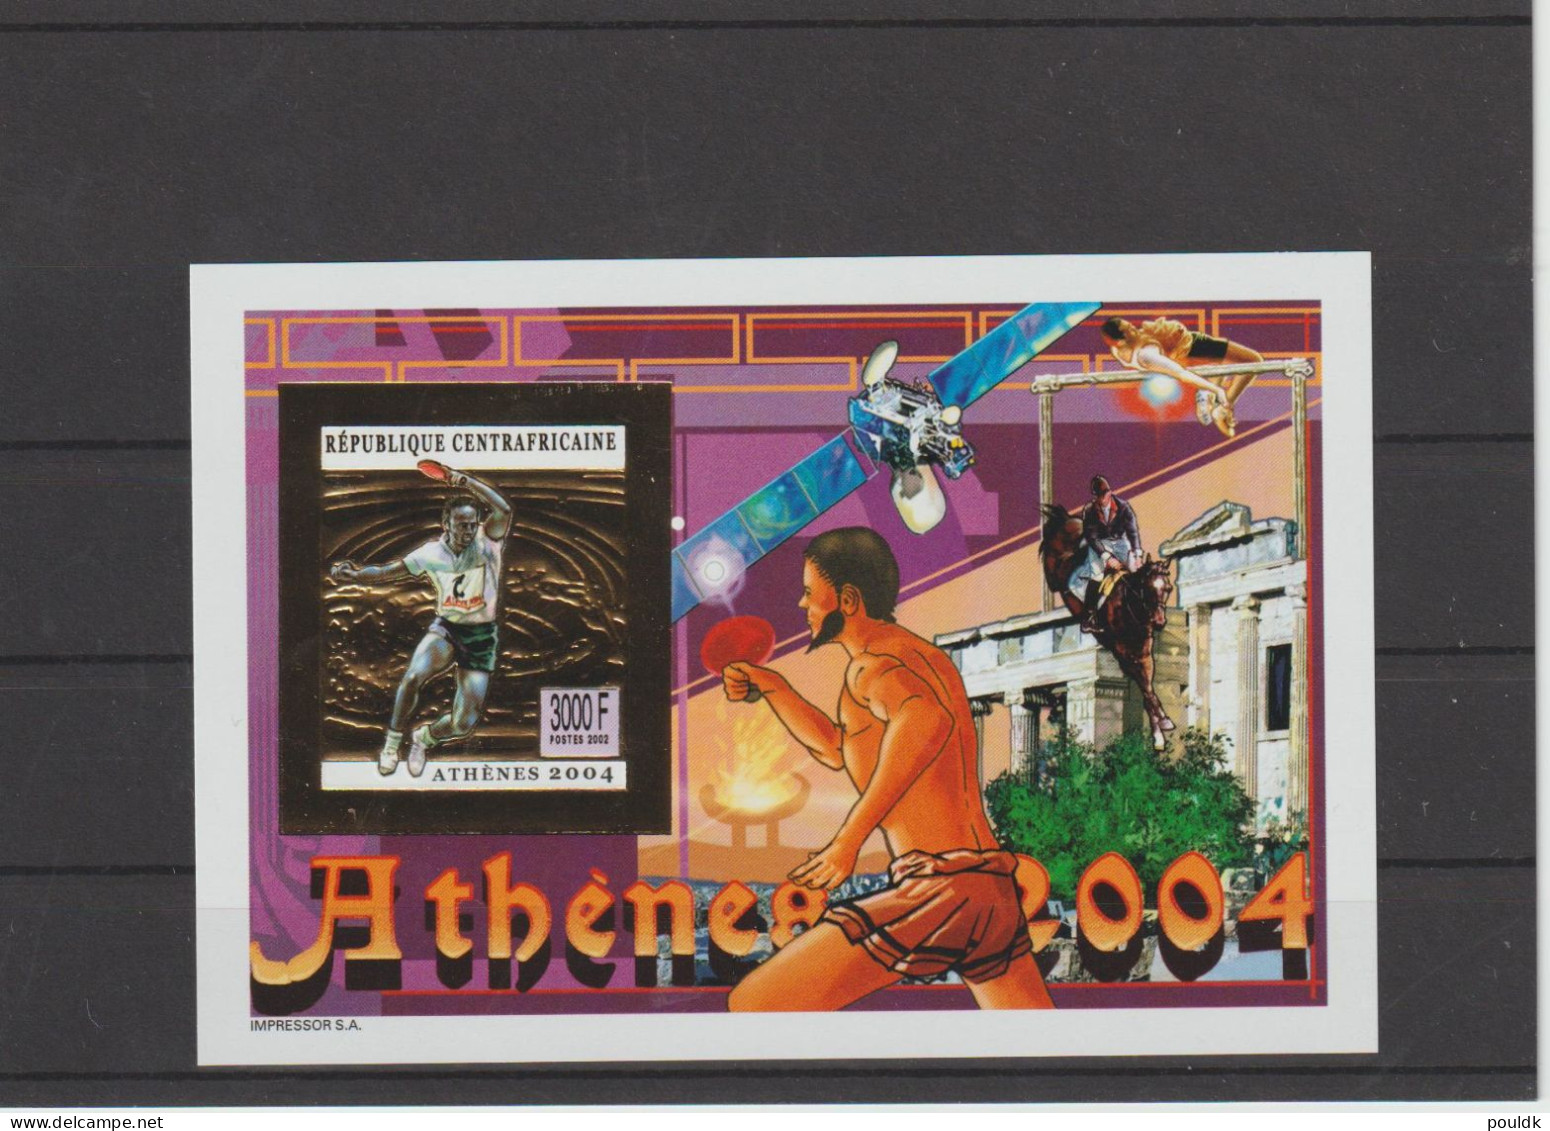 Republique Centrafricaine 2004 Olympic Games In Athens. Four Gold Souvenir Sheets + 4 Stamps MNH/**. Postal Weight Appro - Ete 2004: Athènes